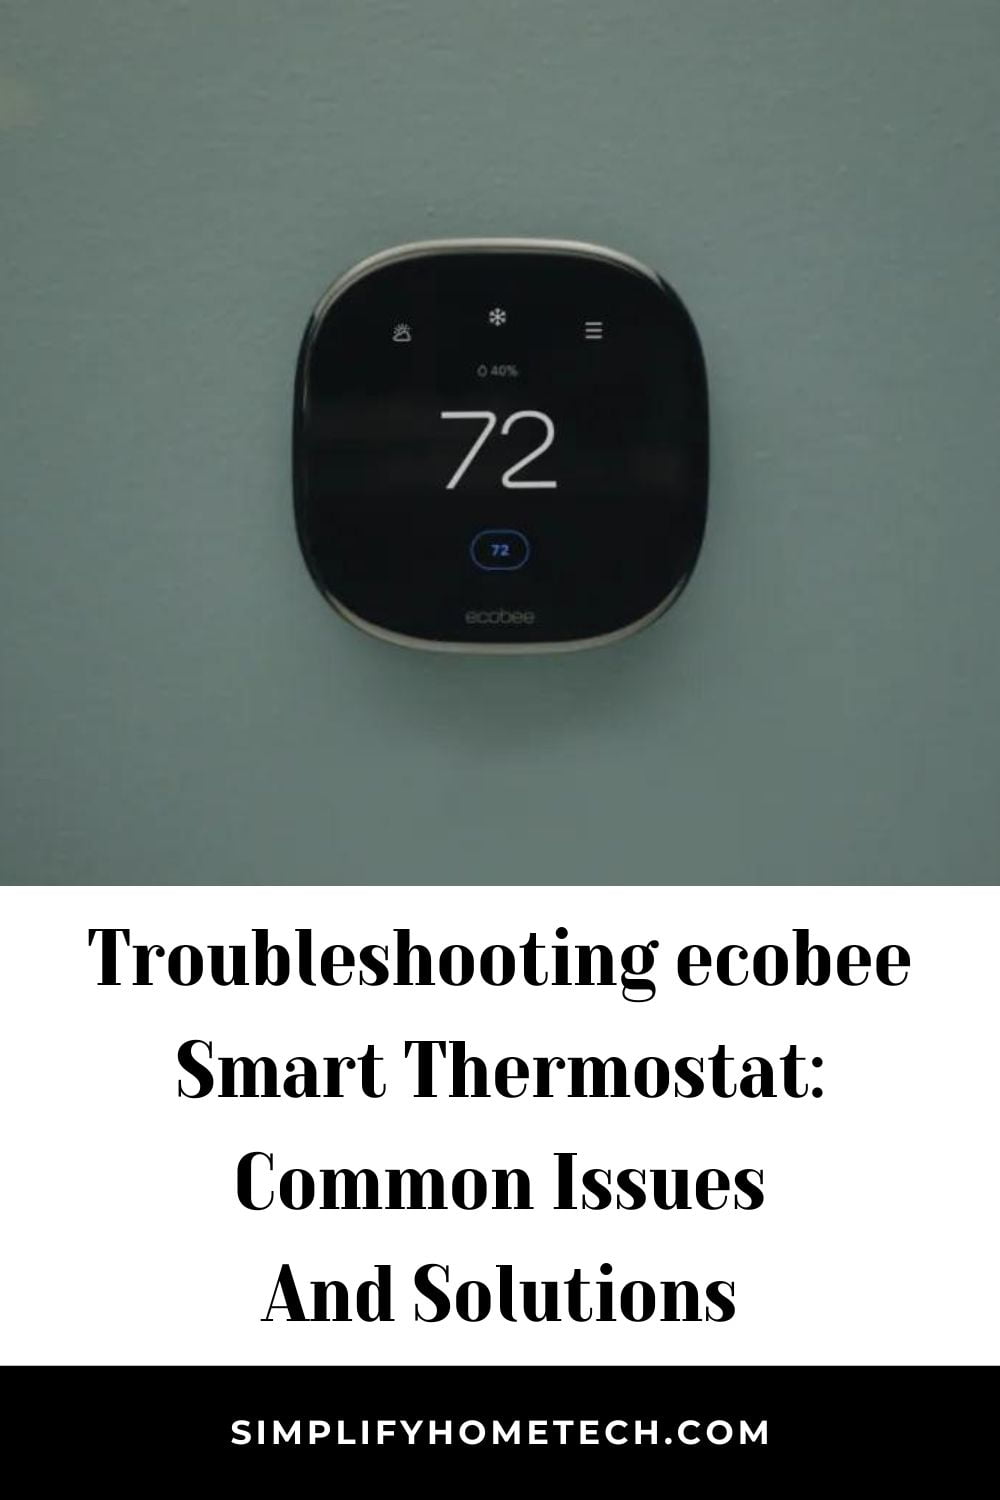 Troubleshooting ecobee Smart Thermostat: Common Issues and Solutions